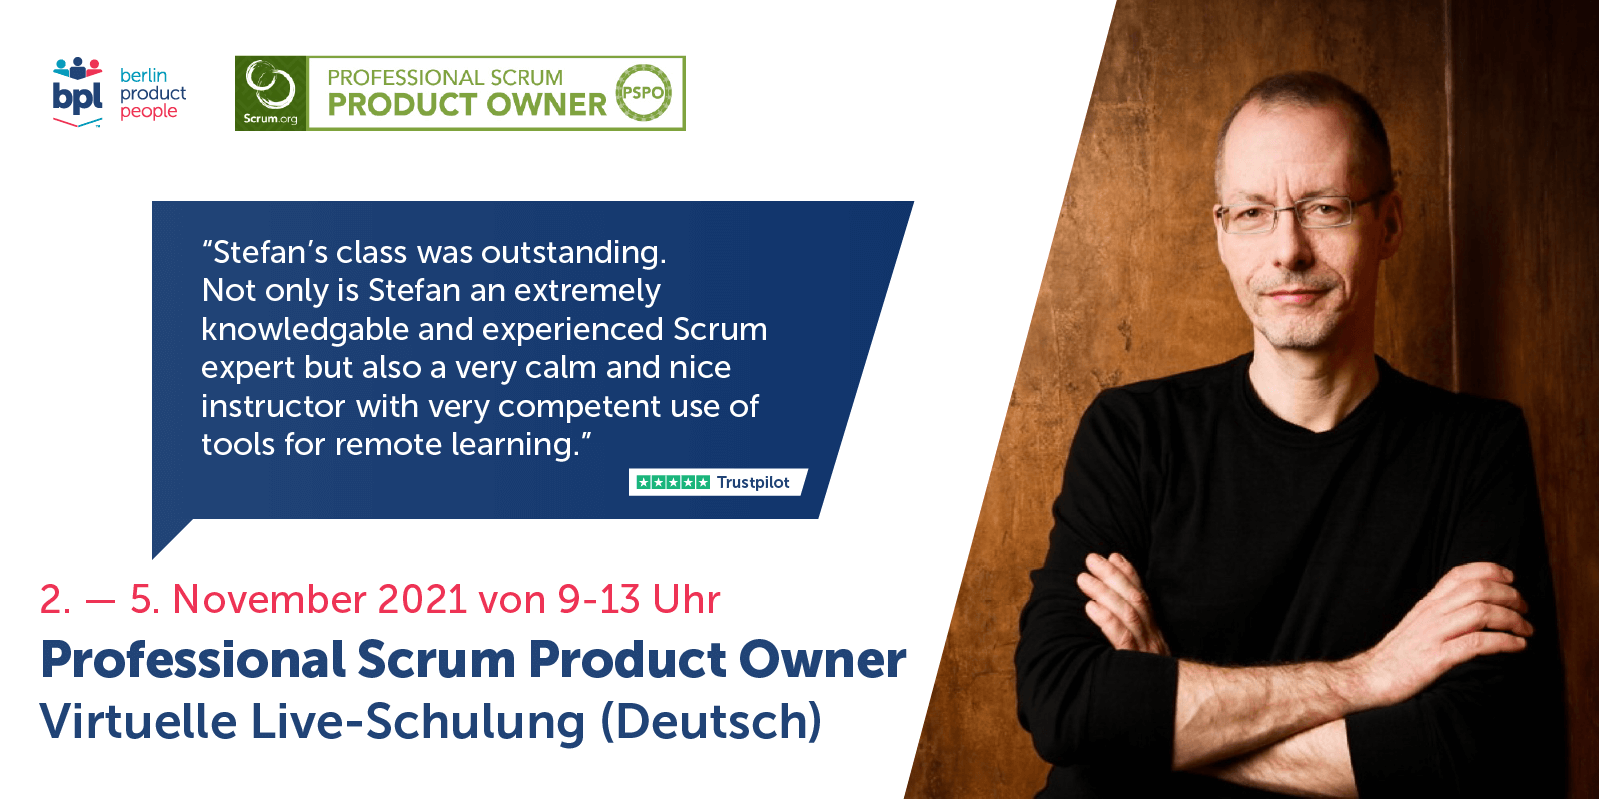 Virtuelle Professional Scrum Product Owner Schulung mit PSPO Zertifikat — 21. bis 24. September 2021 — Berlin Product People GmbH